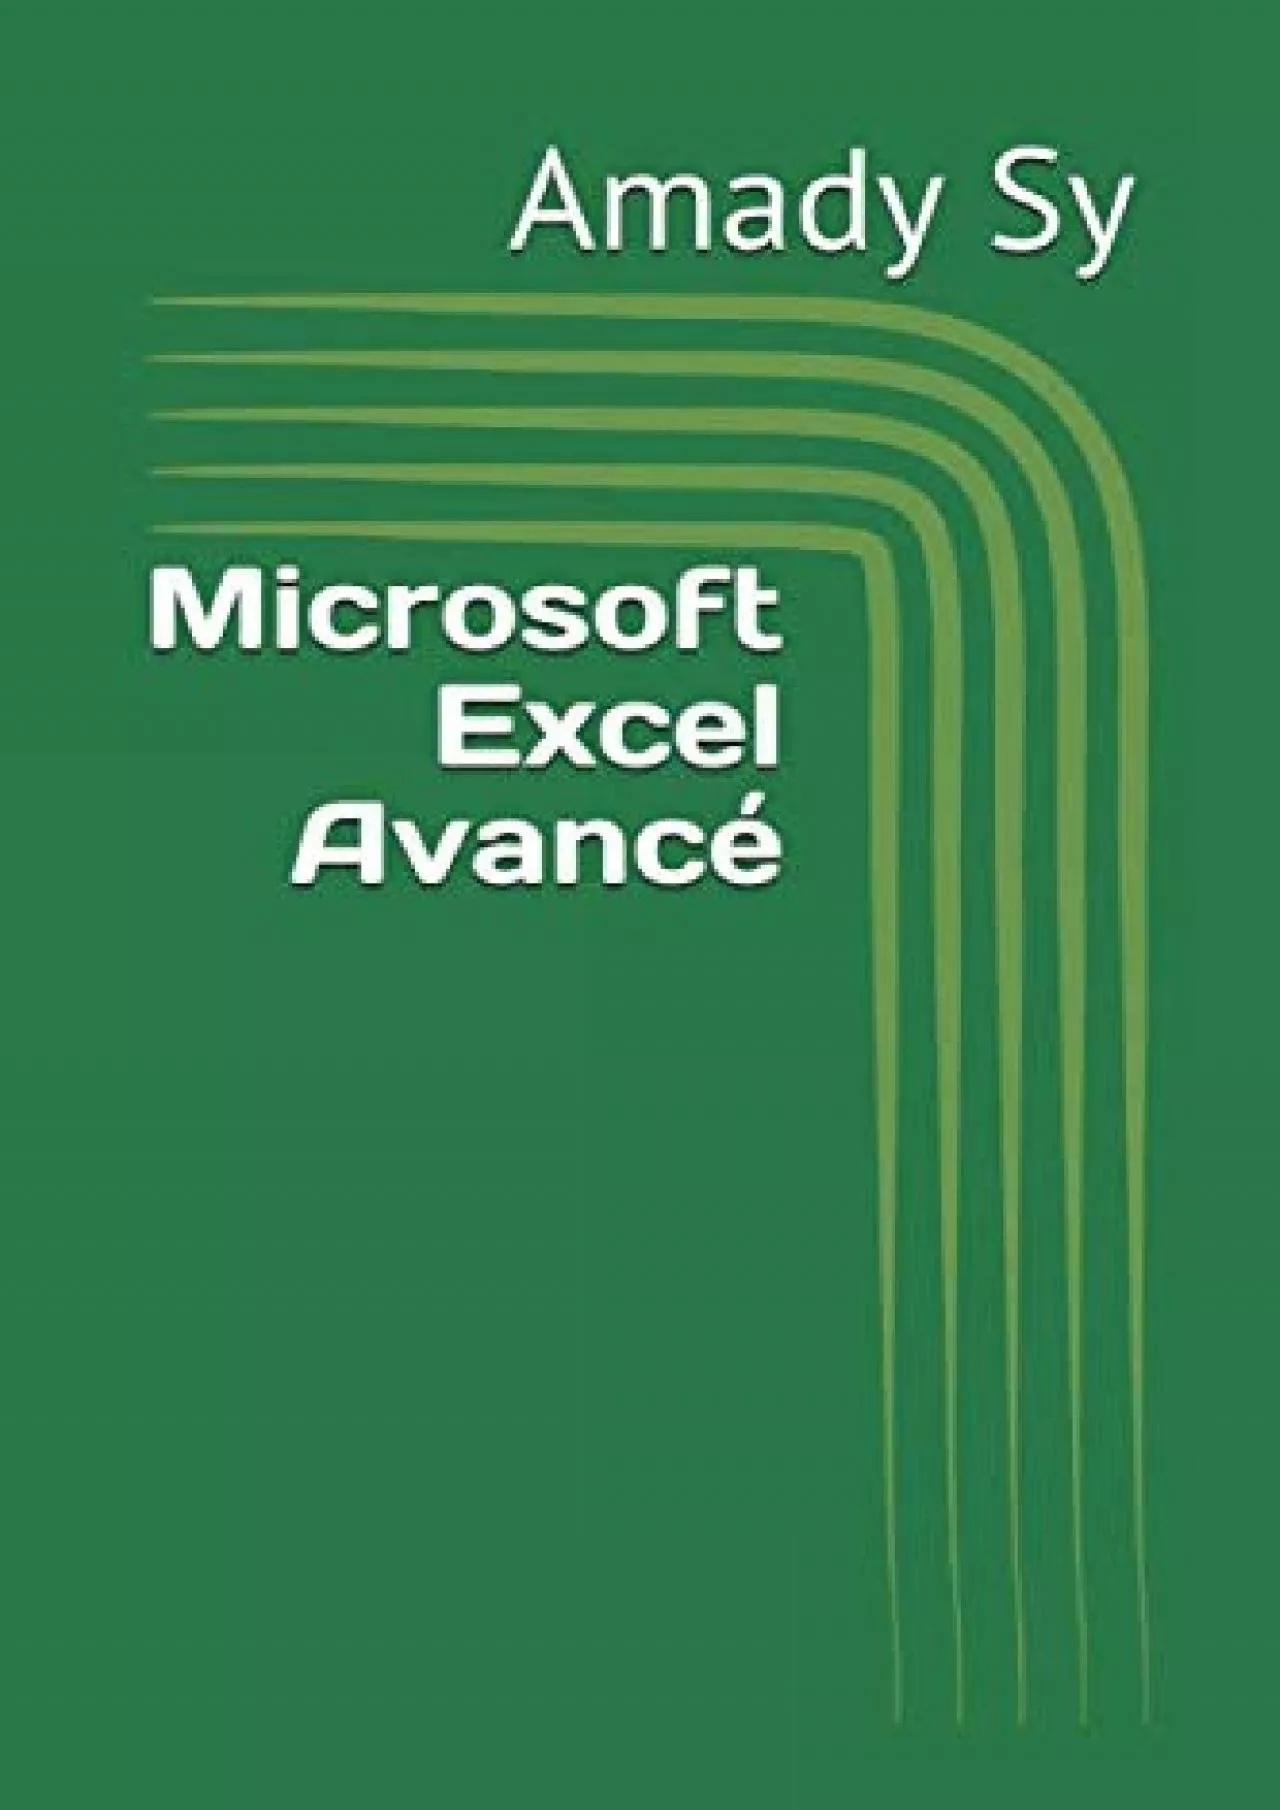 [EBOOK] Microsoft Excel Avancé: Excel approfondi French Edition